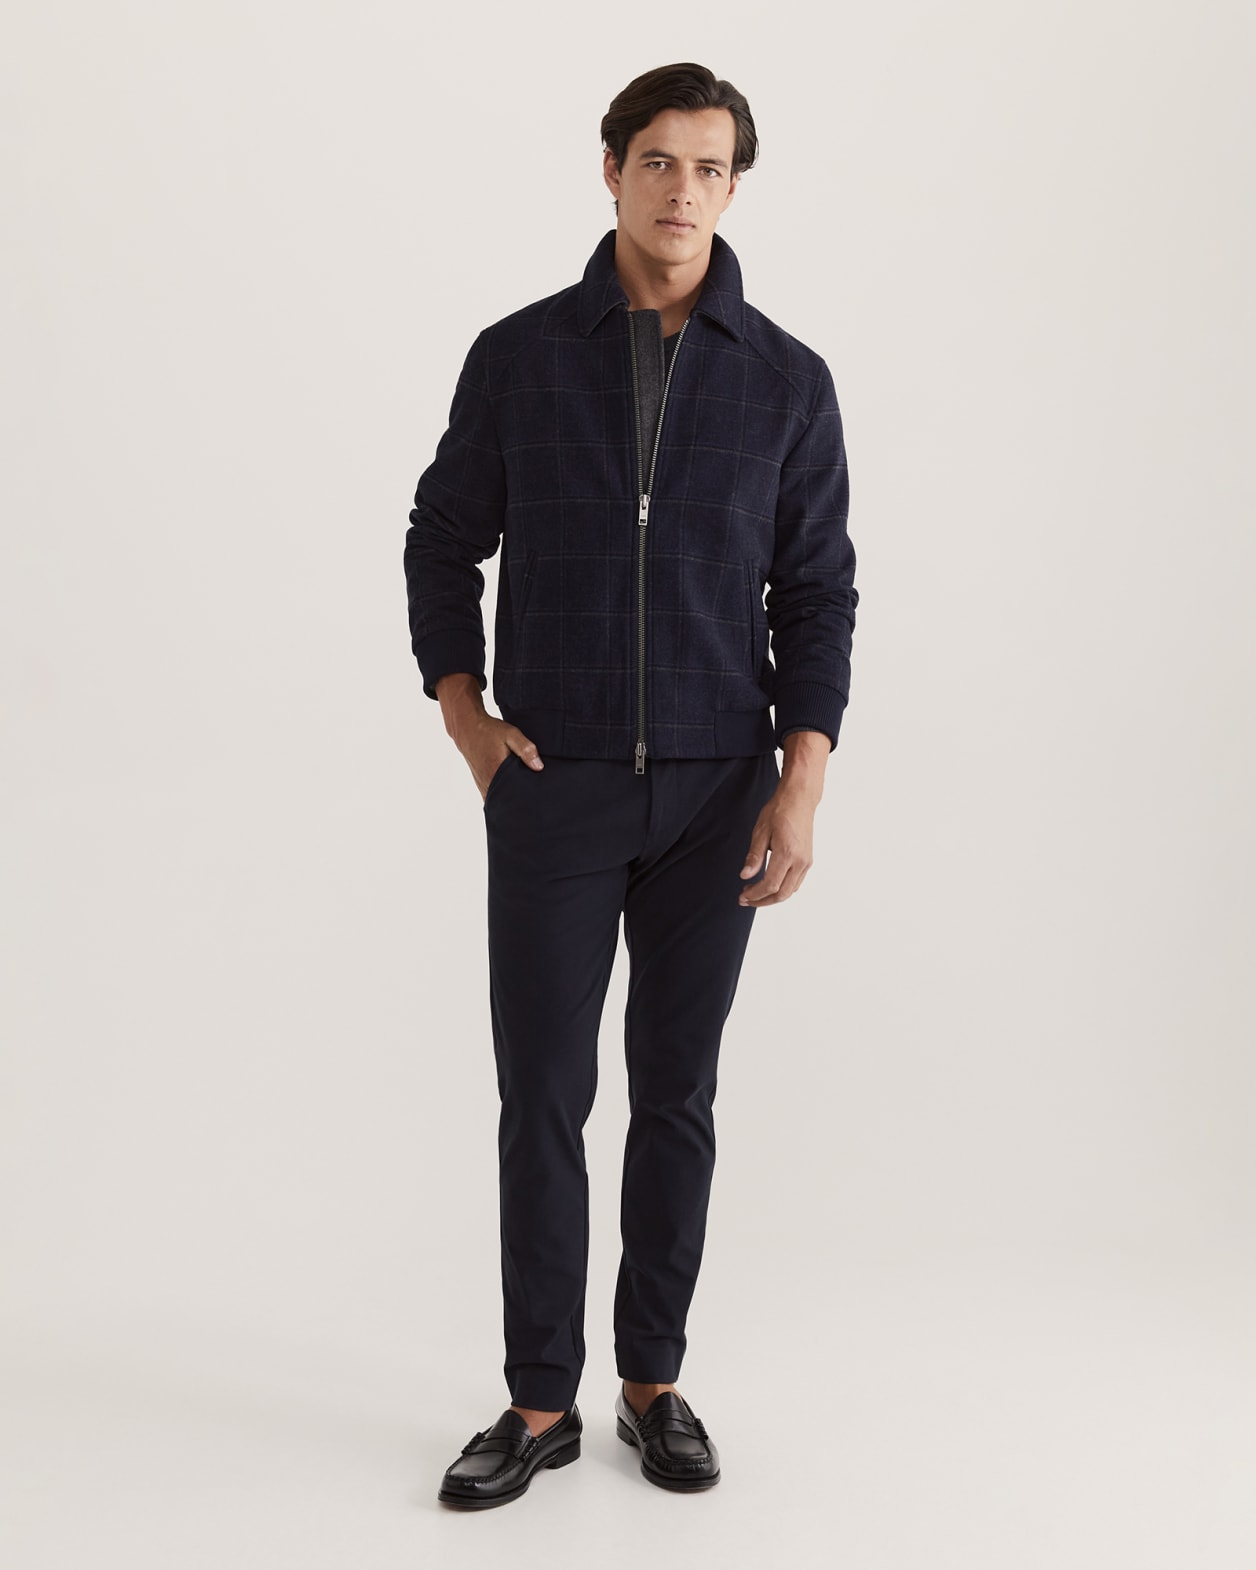 Theo Wool Check Bomber in CHECK